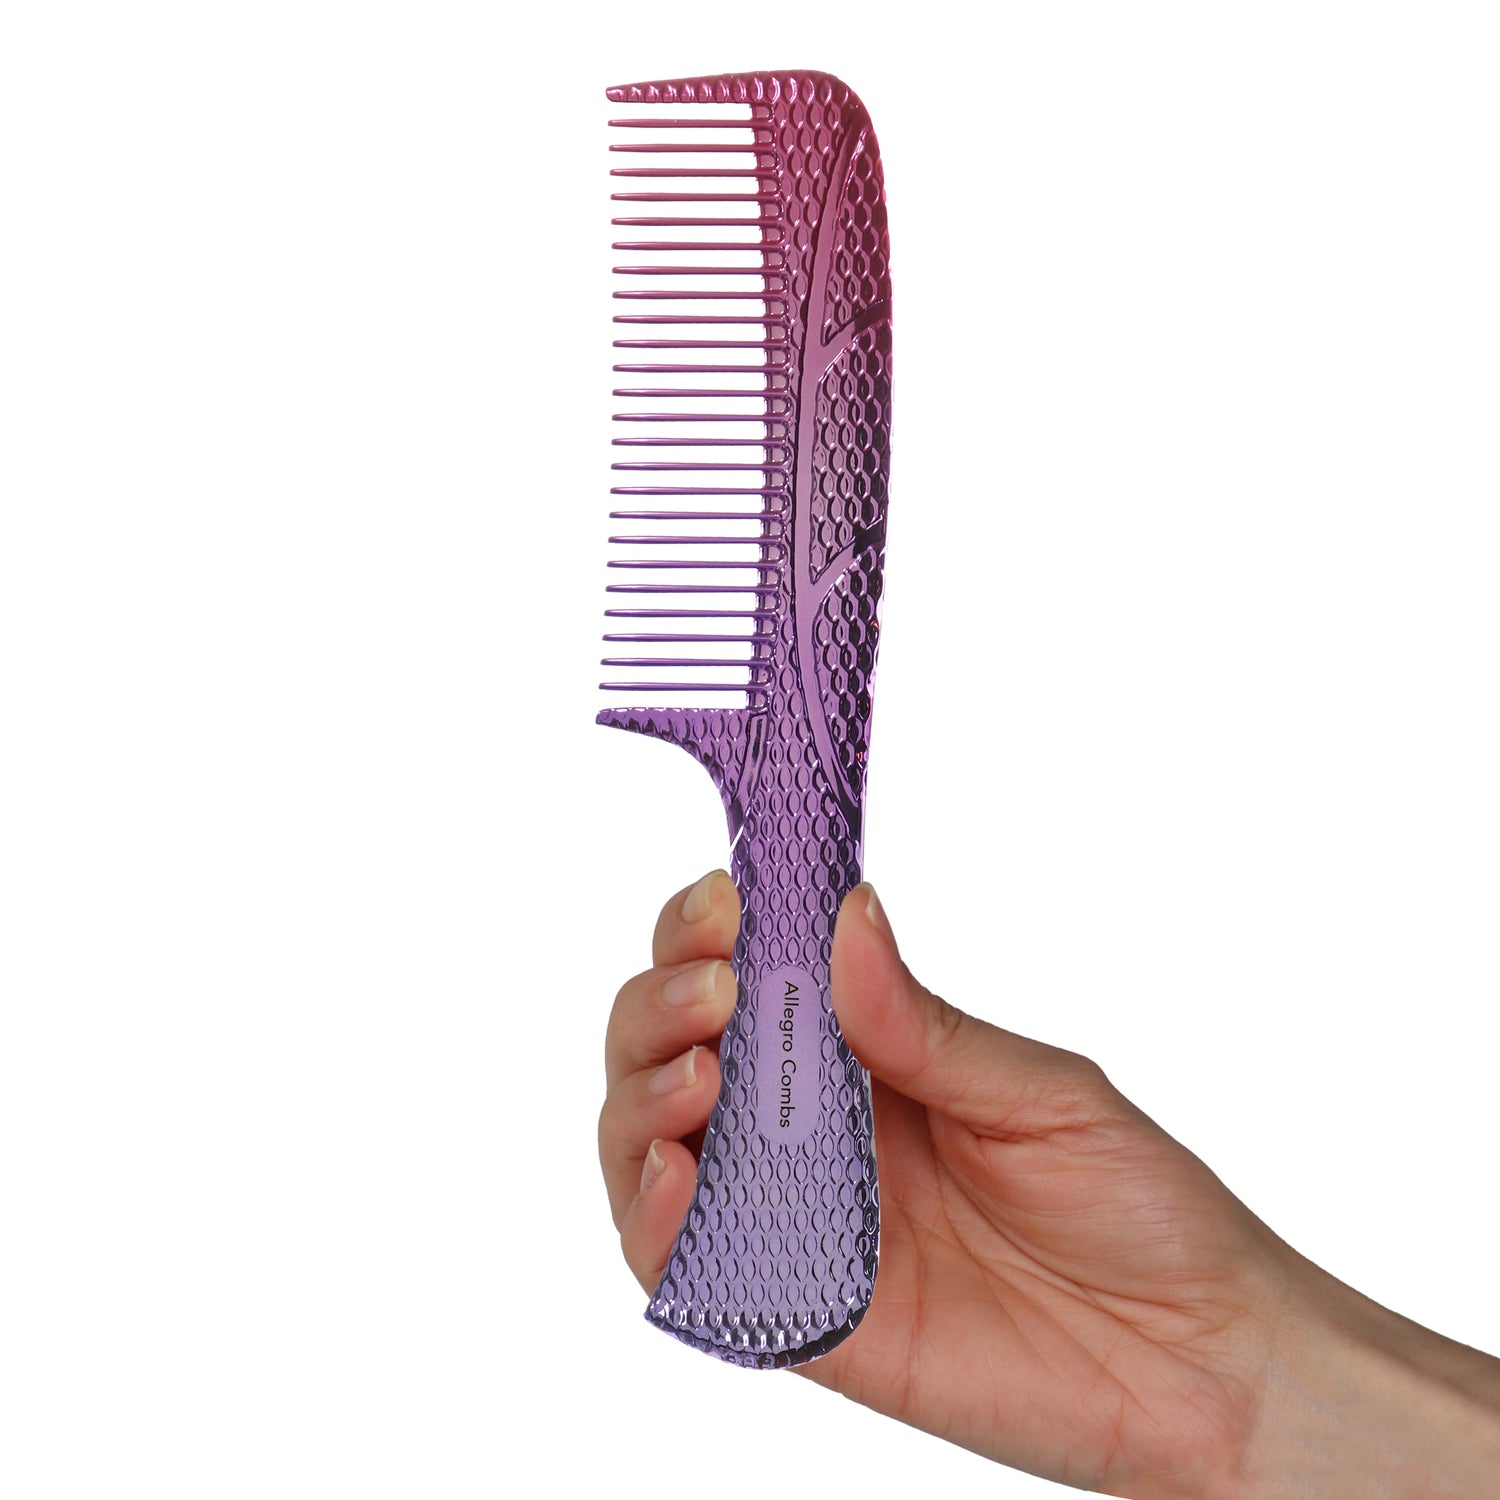 Allegro Comb 1004 Wide Tooth Detangling Hair Combs For Women